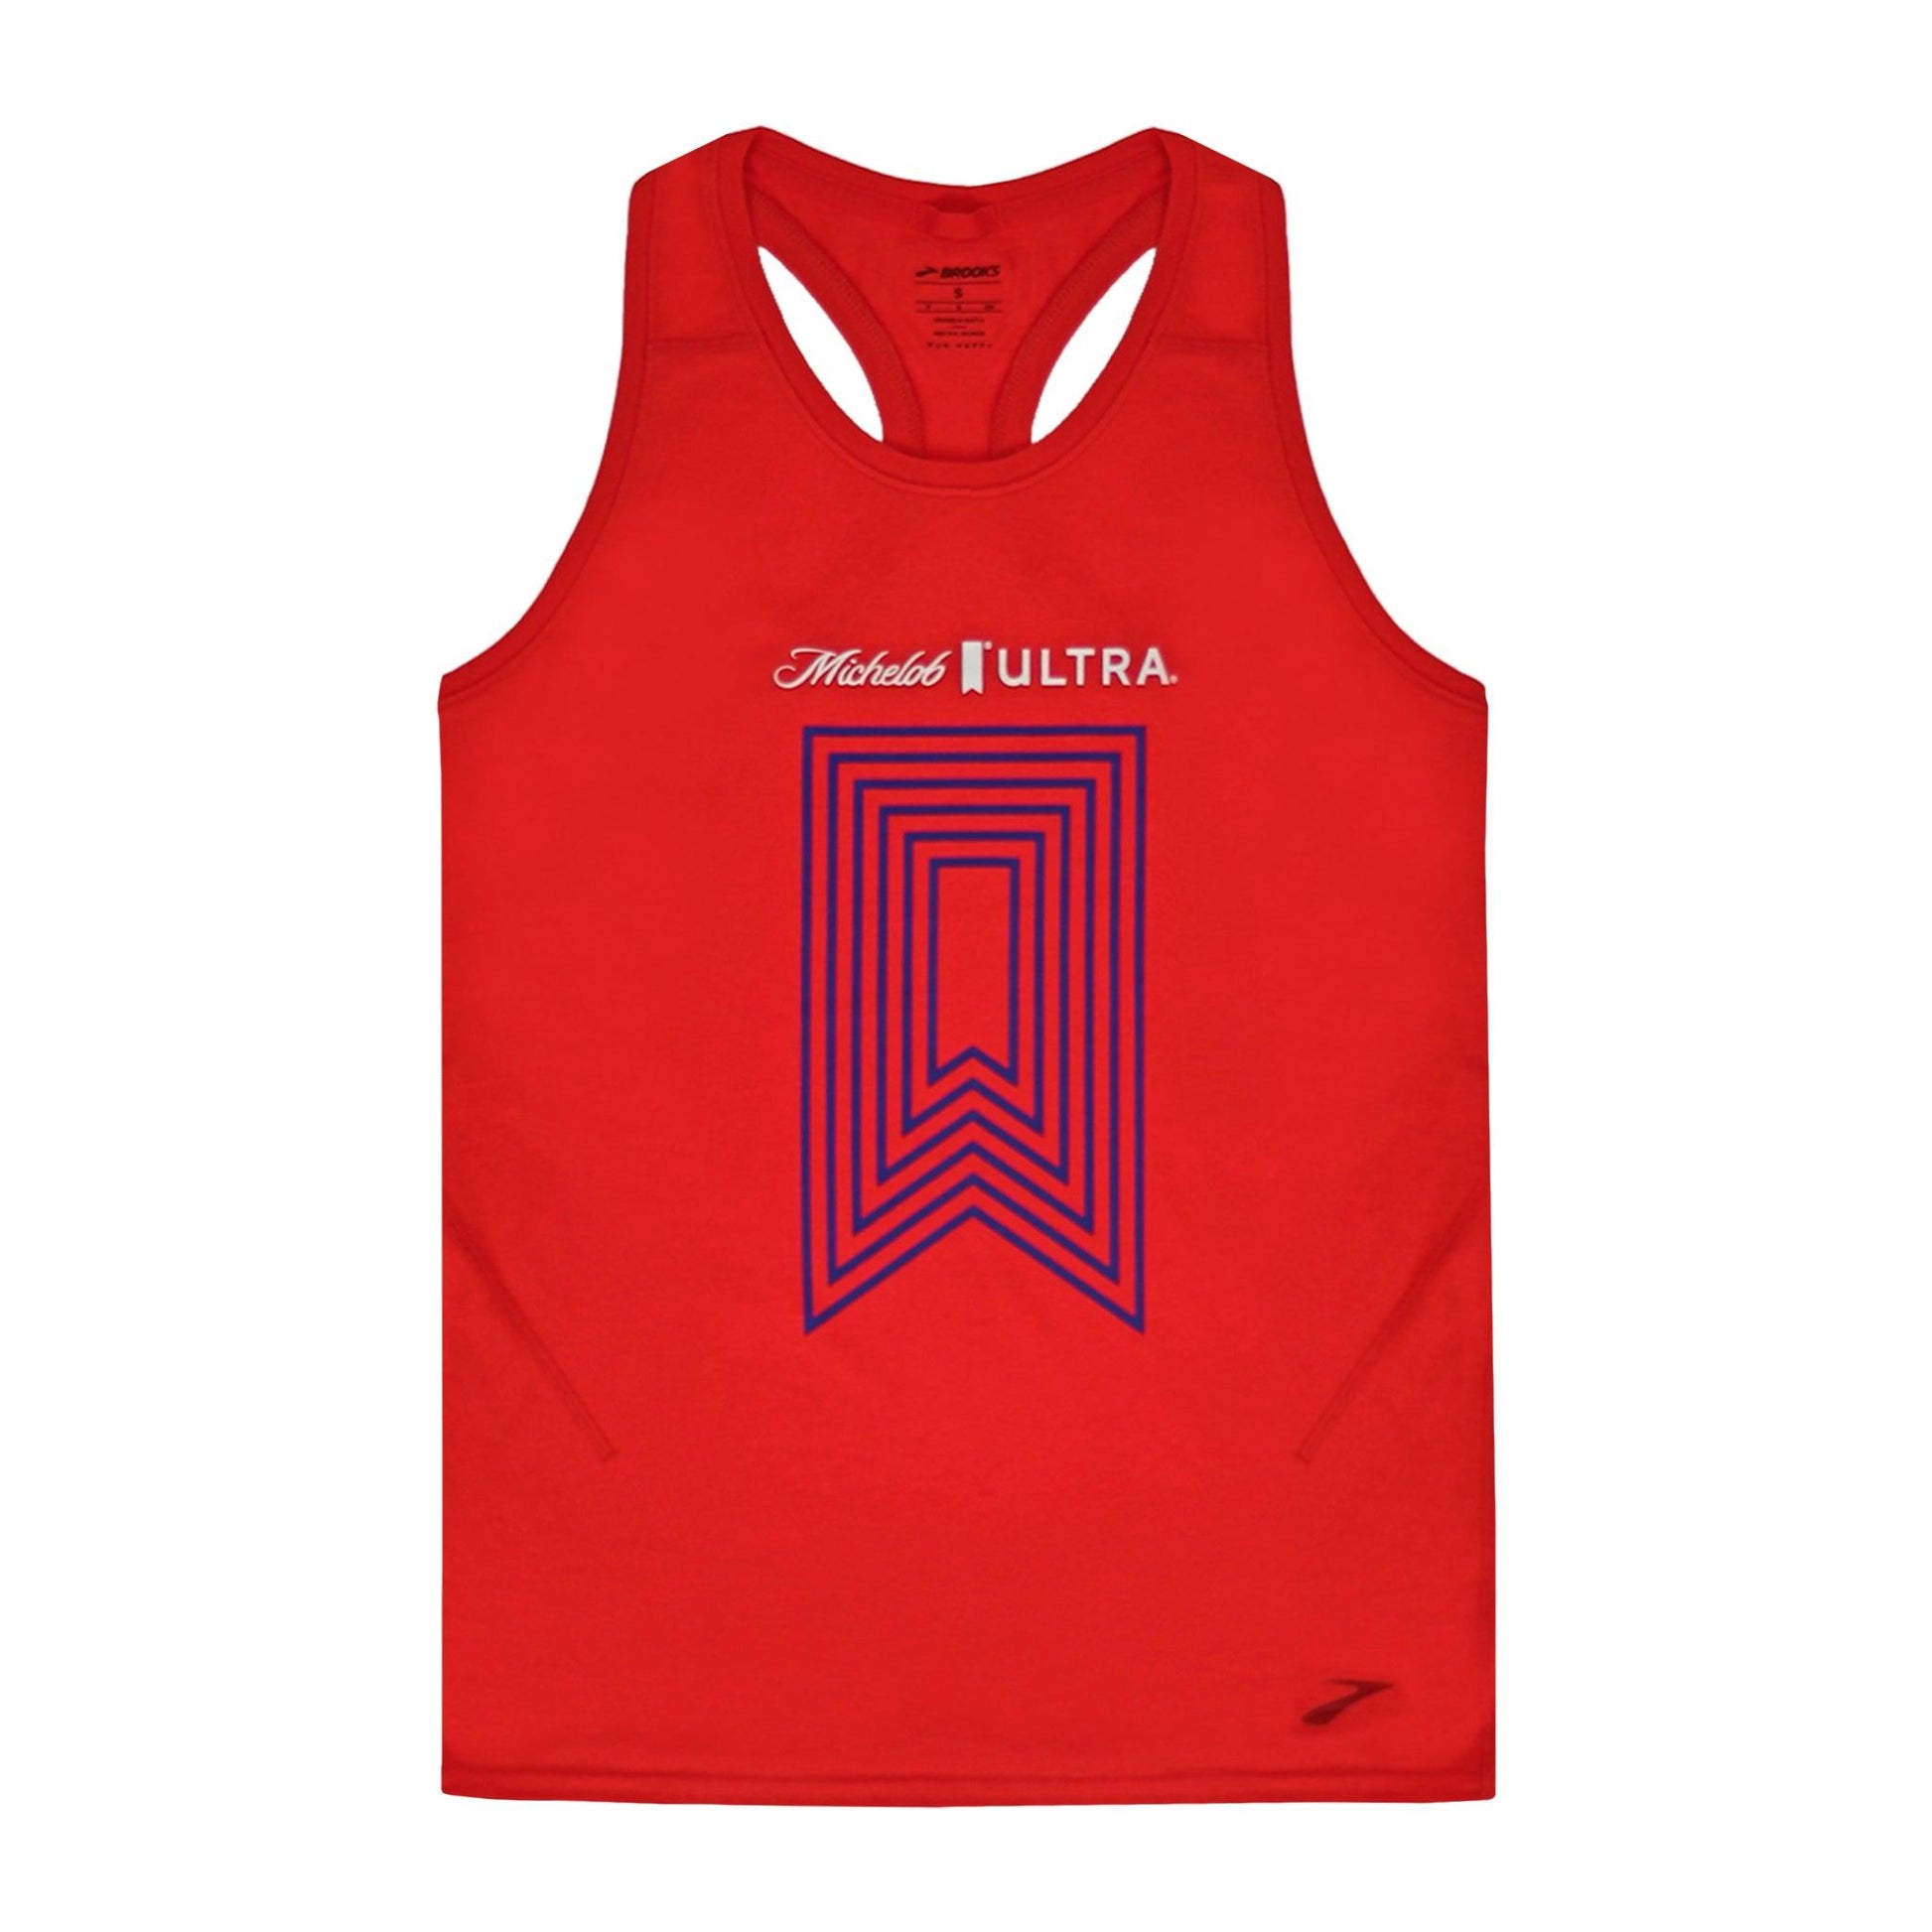 michelob-ultra-brooks-training-distance-tank-red-front